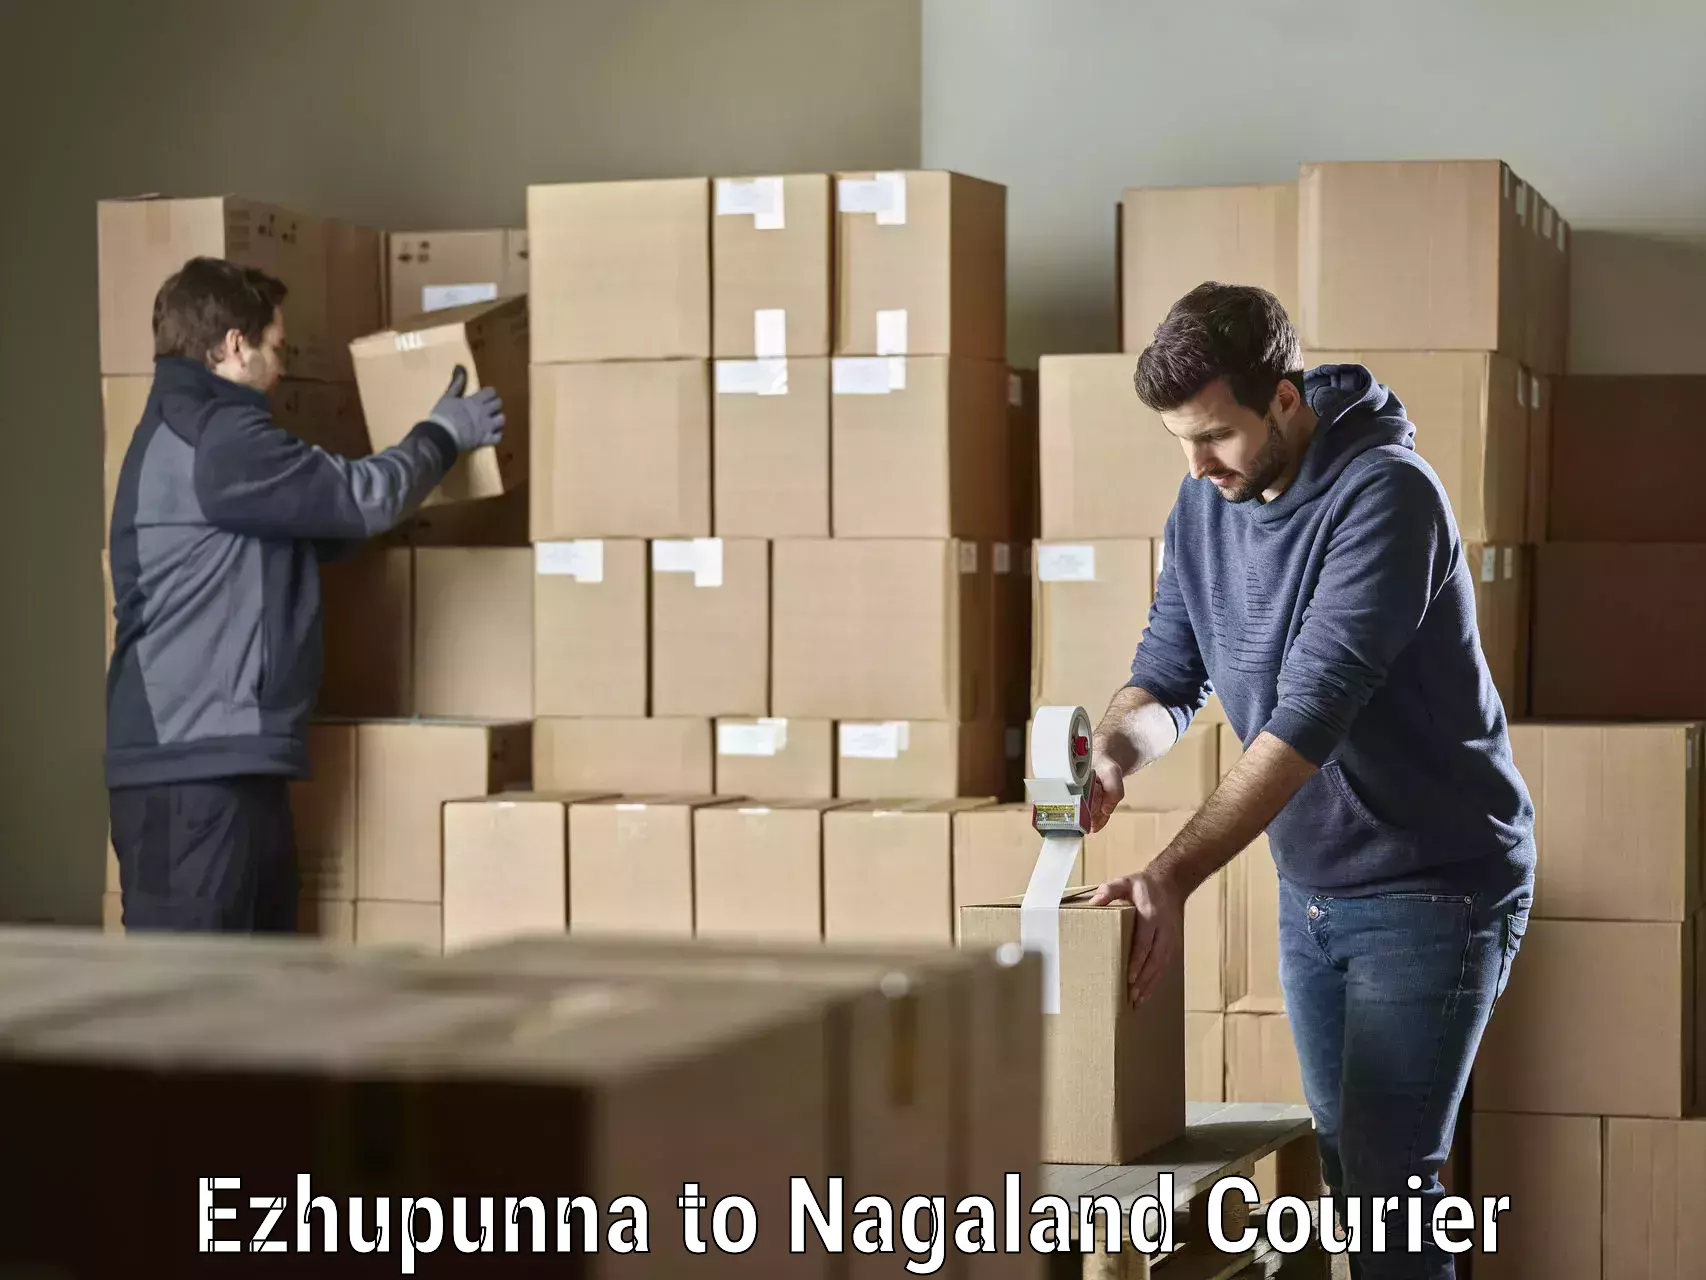 Business delivery service Ezhupunna to NIT Nagaland